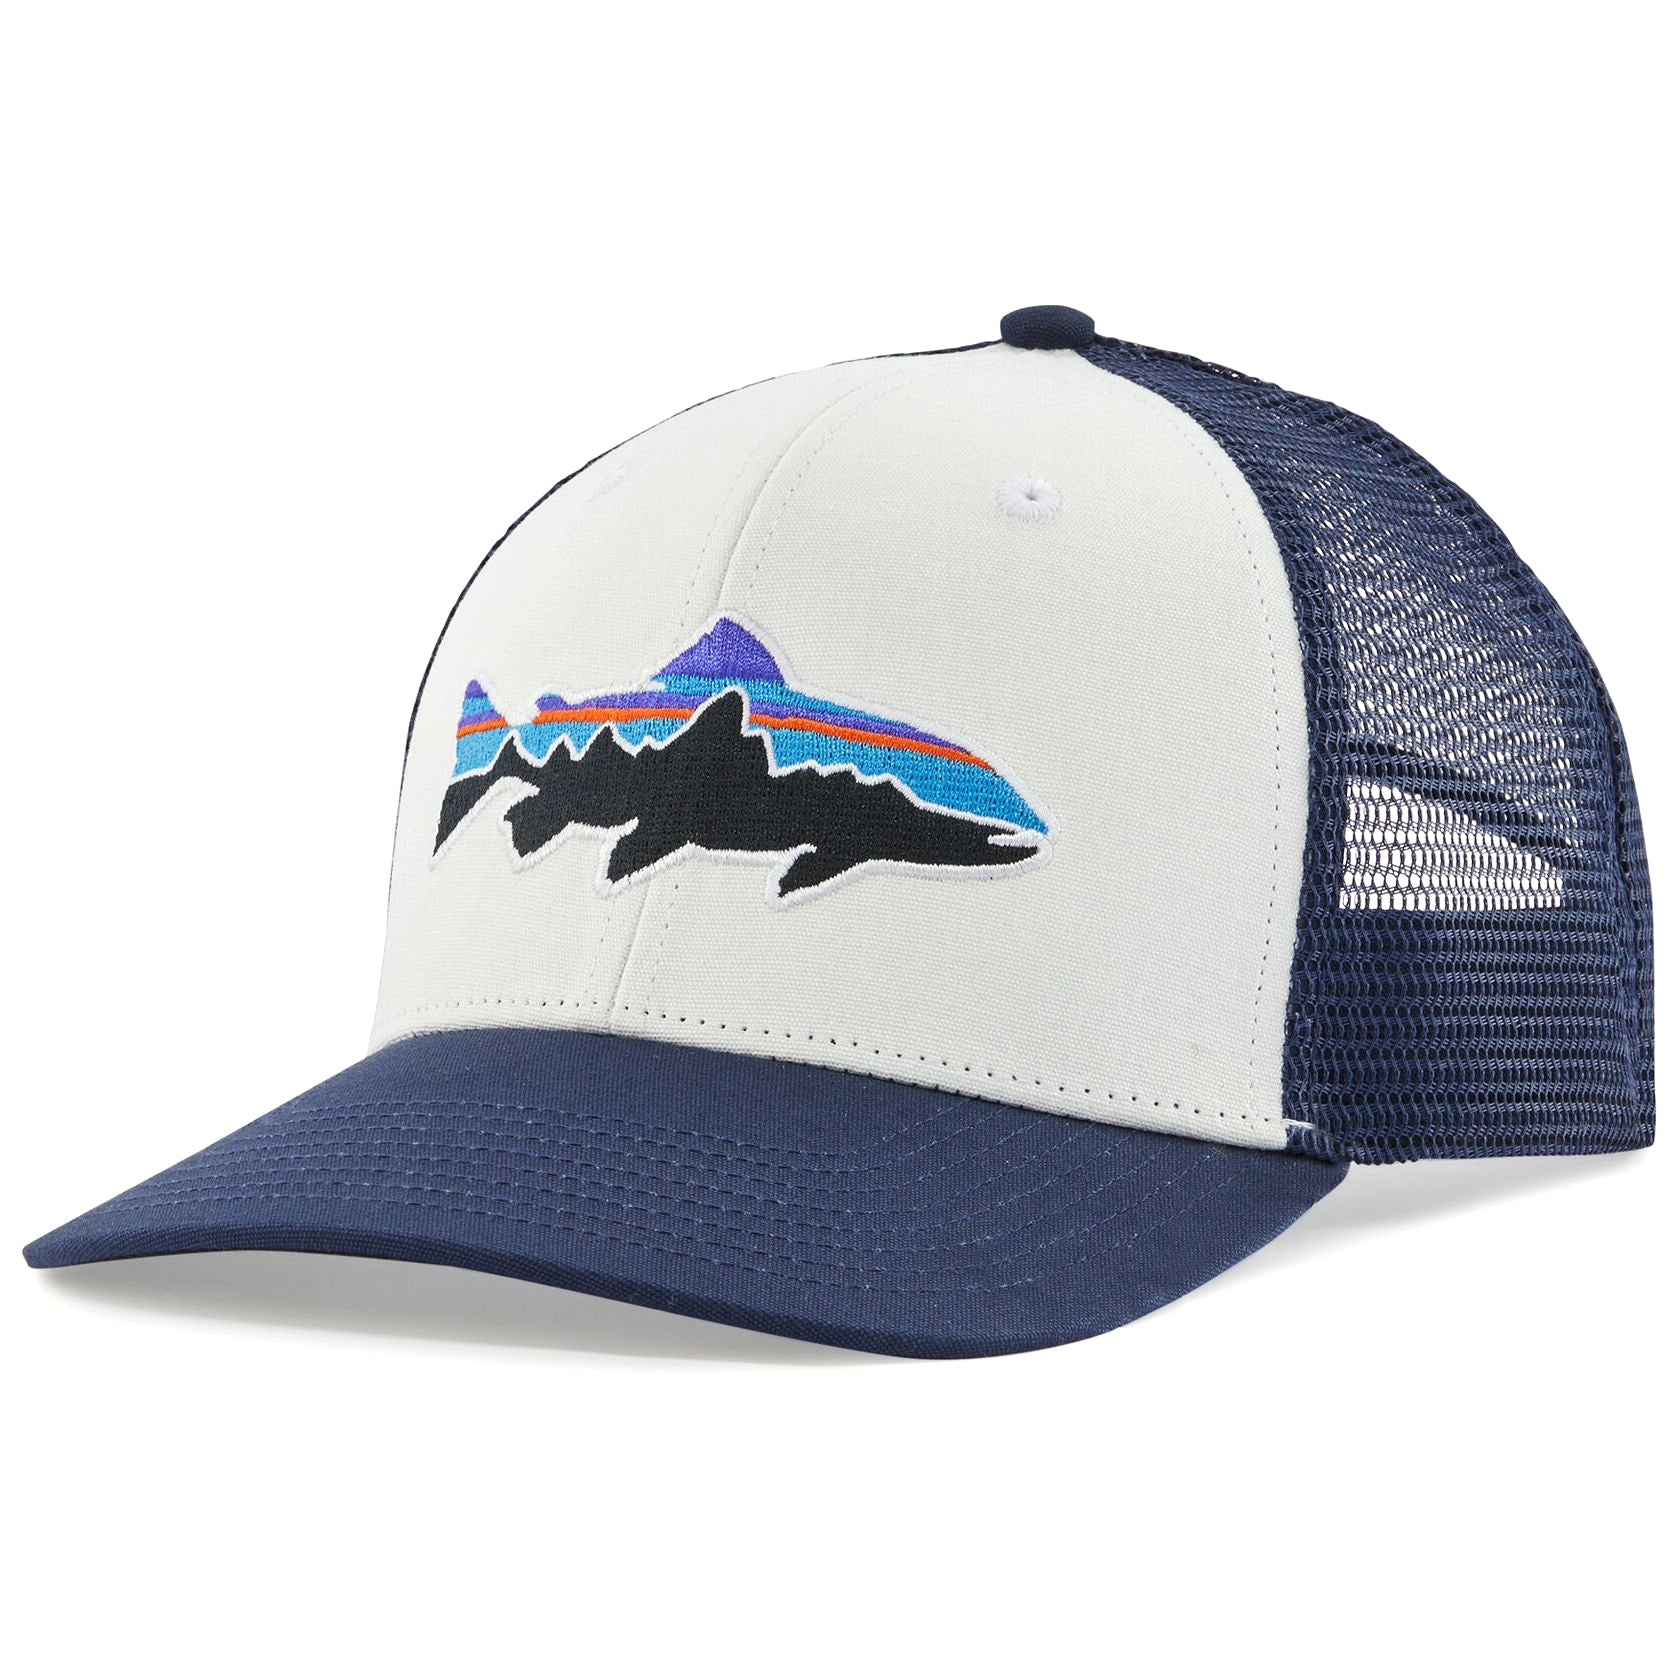 Patagonia Fitz Roy Trout Trucker Hat WINA Image 01